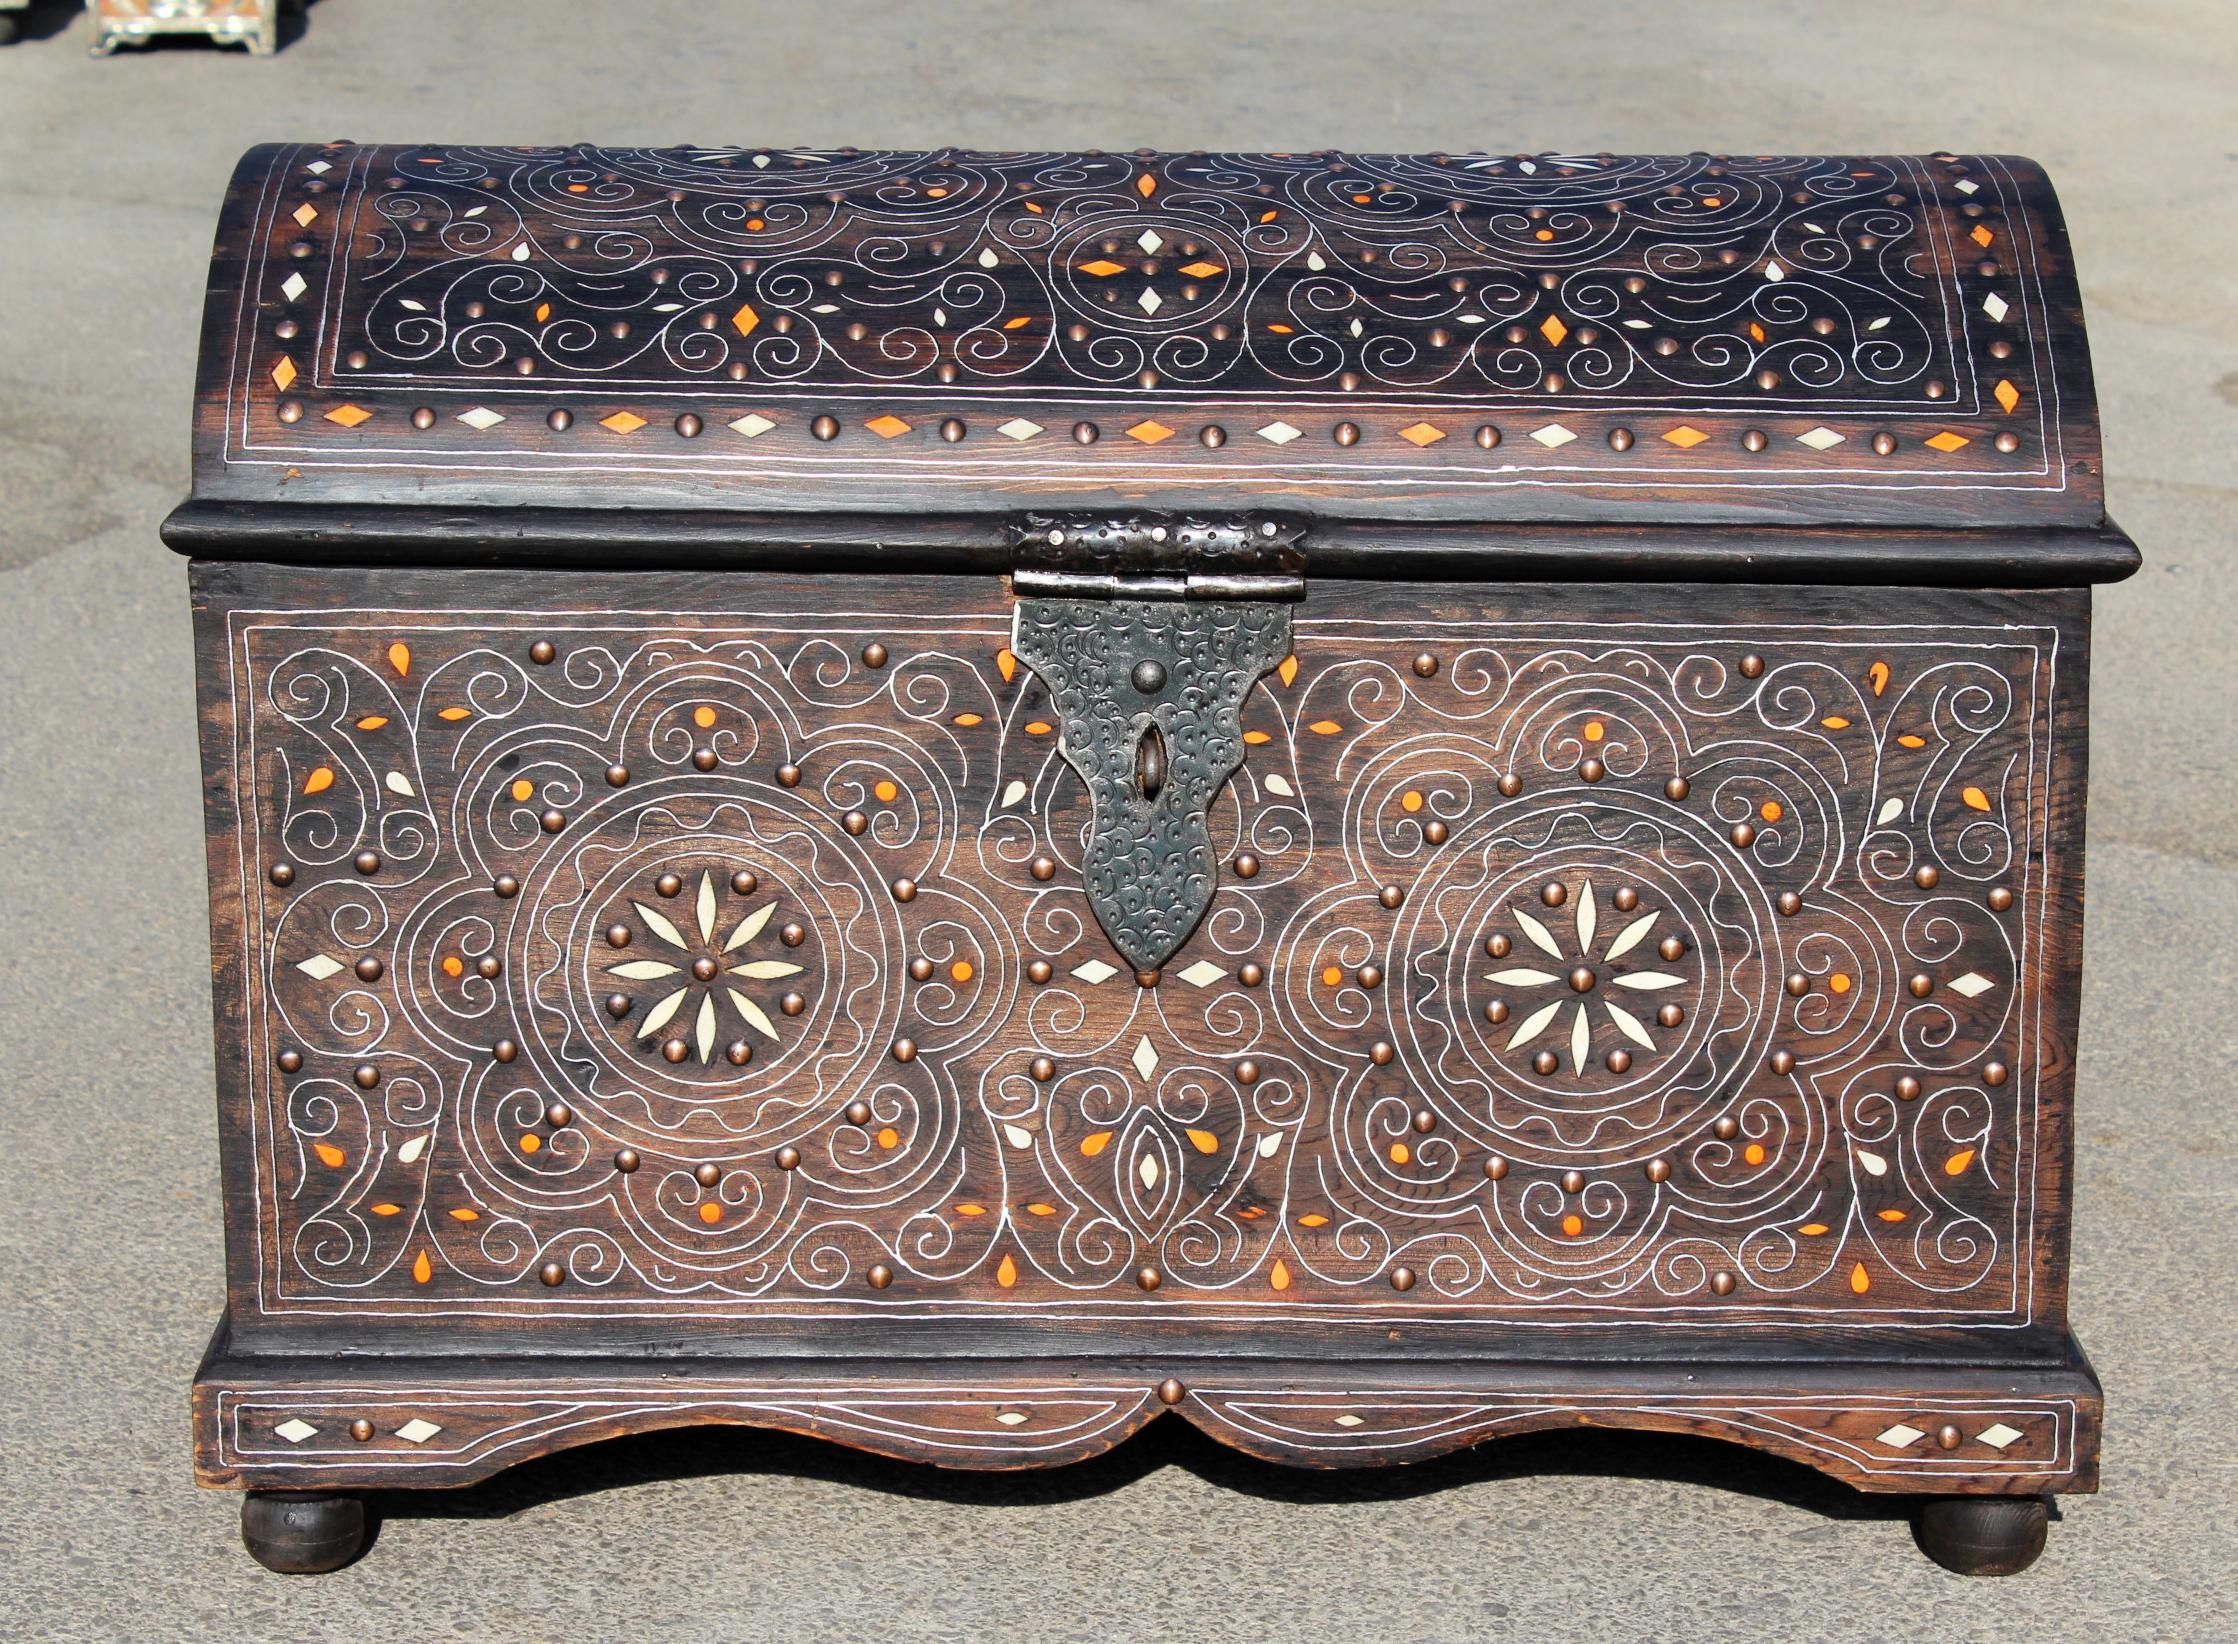 Spanish wooden chest with inlay decorations and iron fittings.